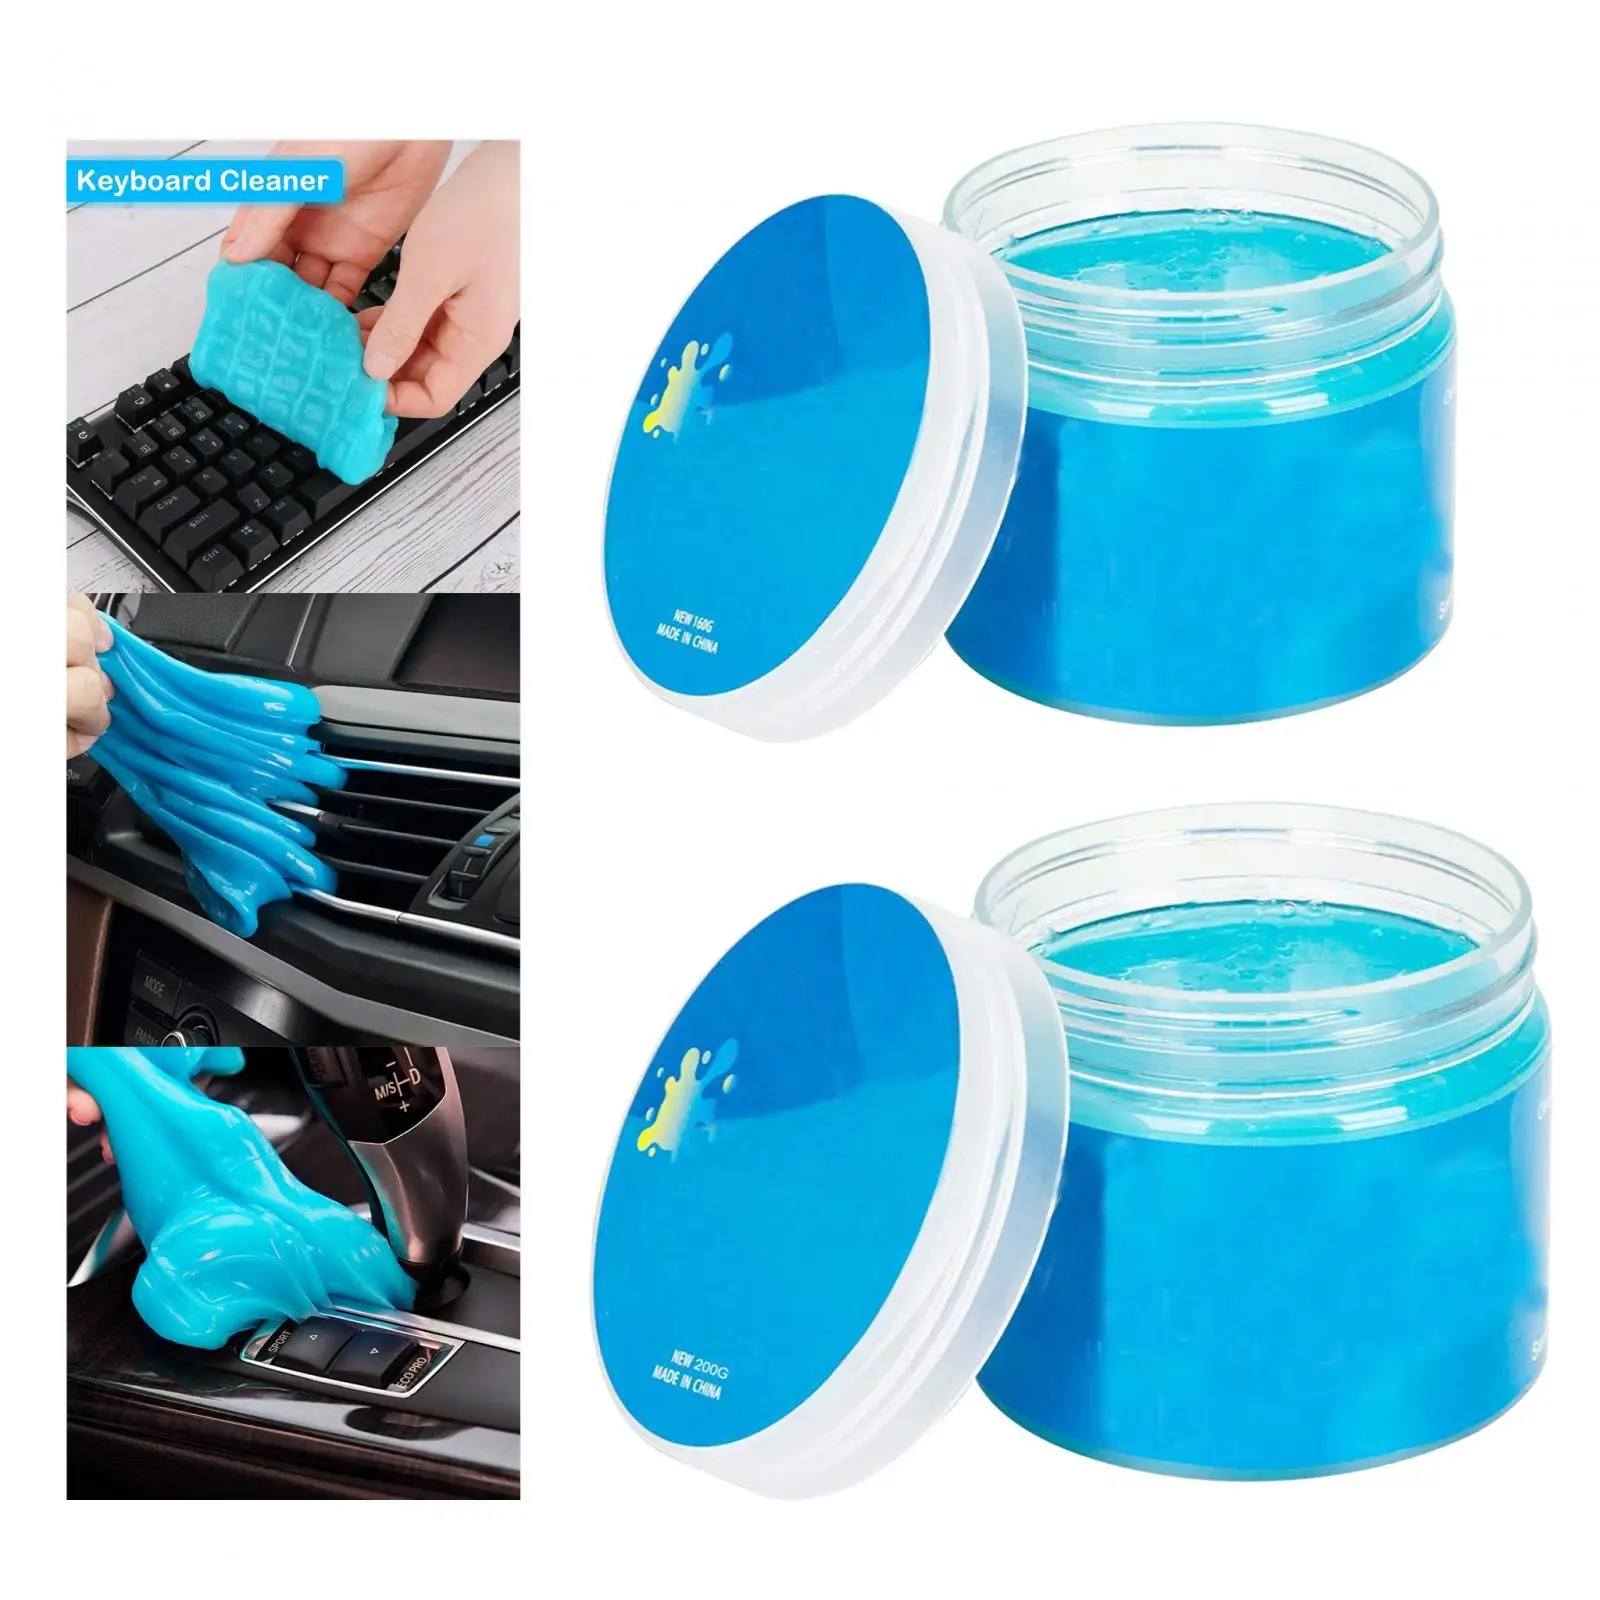 Cleaning Gel for Car, Reusable Automotive Detailing Tool Keyboard Cleaner Gel for Car Air Vent Laptops PC Cameras Dashboard